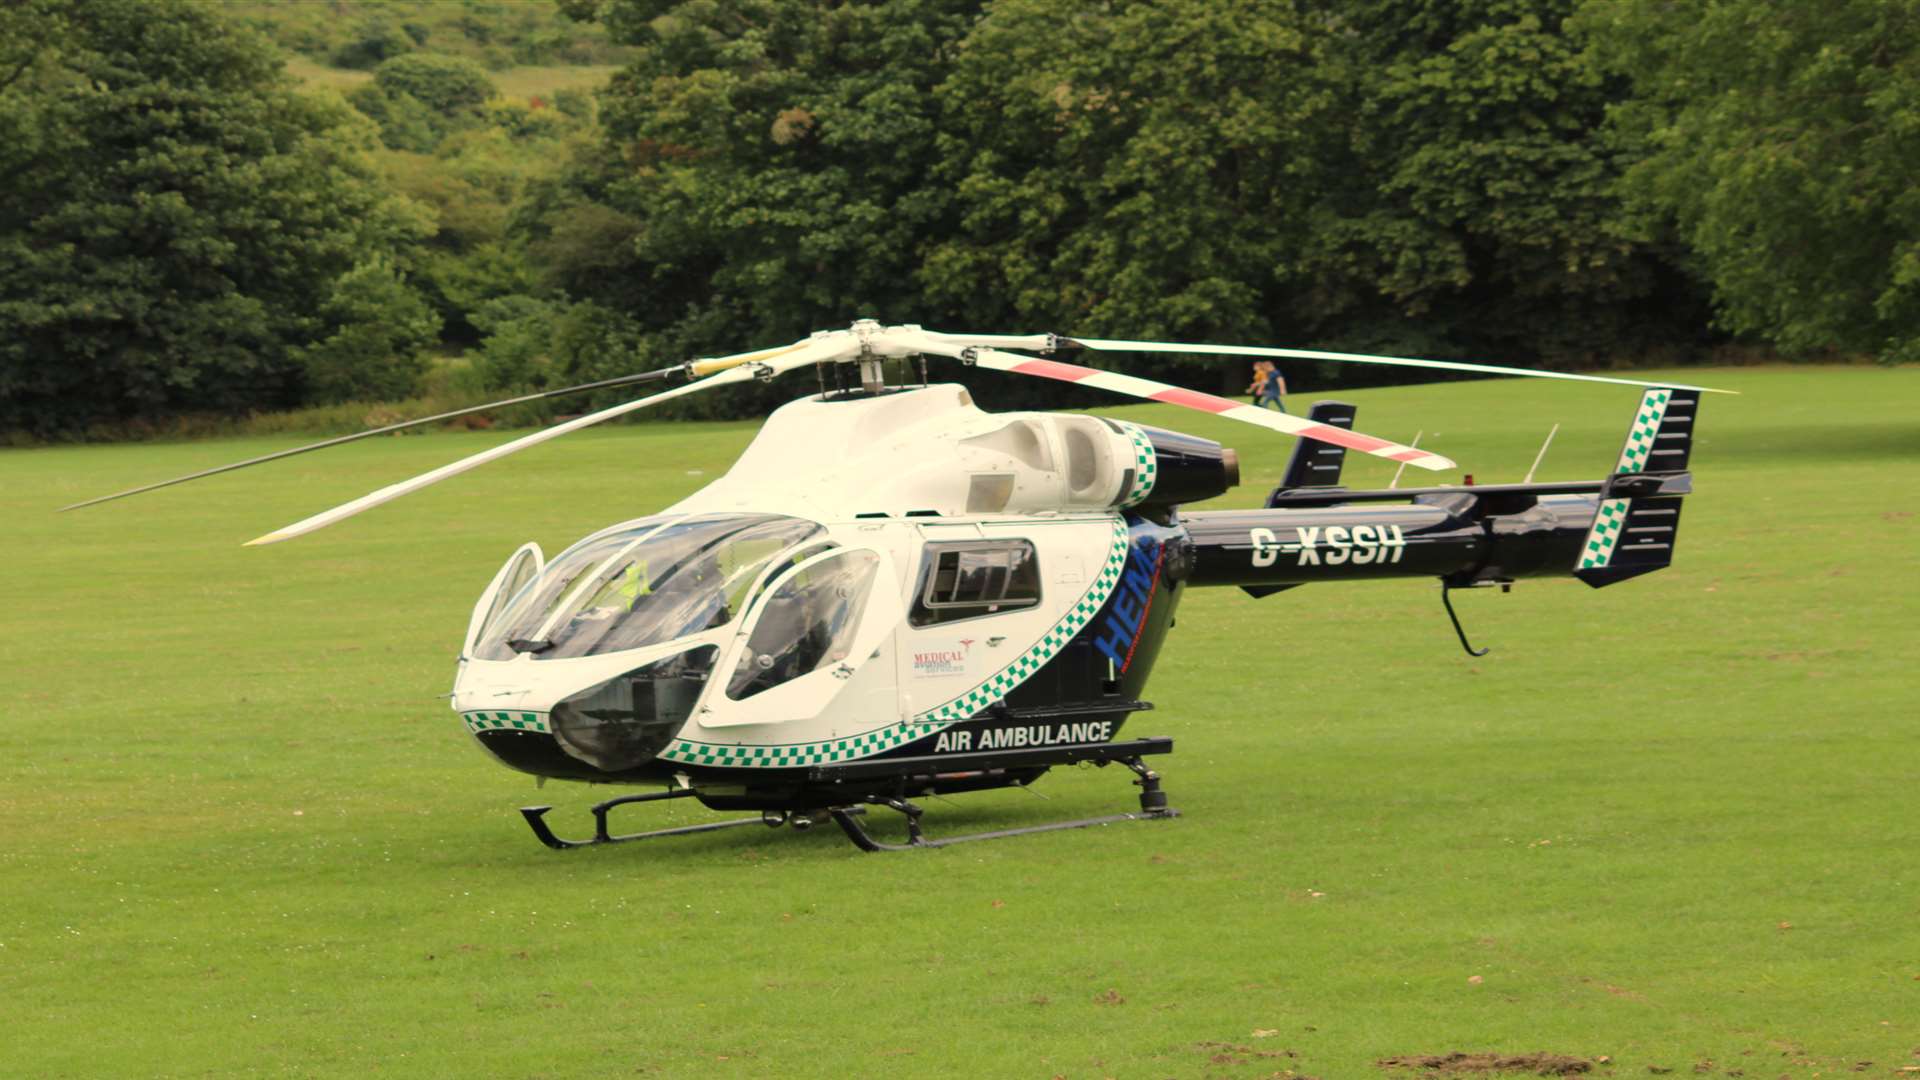 The man was airlifted to hospital in a serious condition